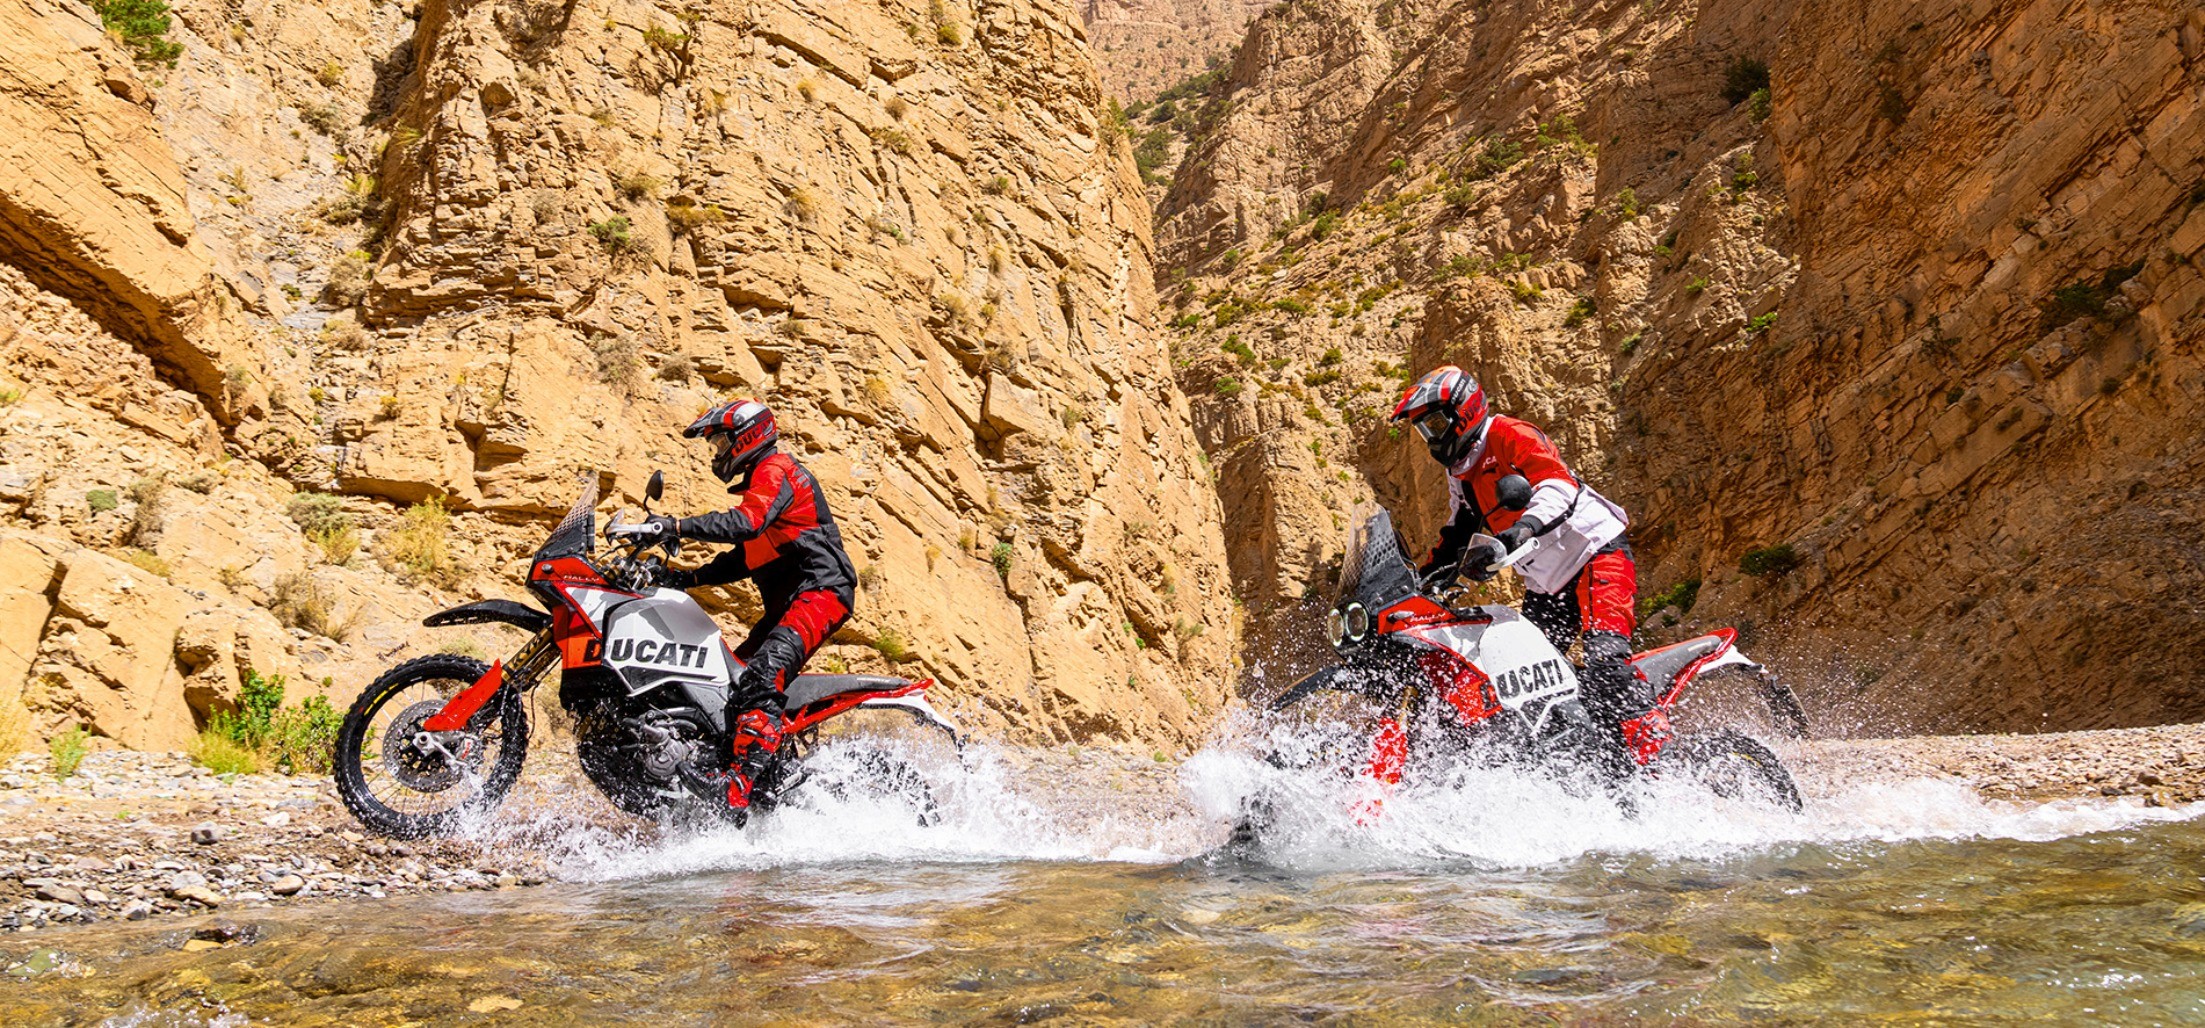 Ducati DesertX Rally: adventure without limits